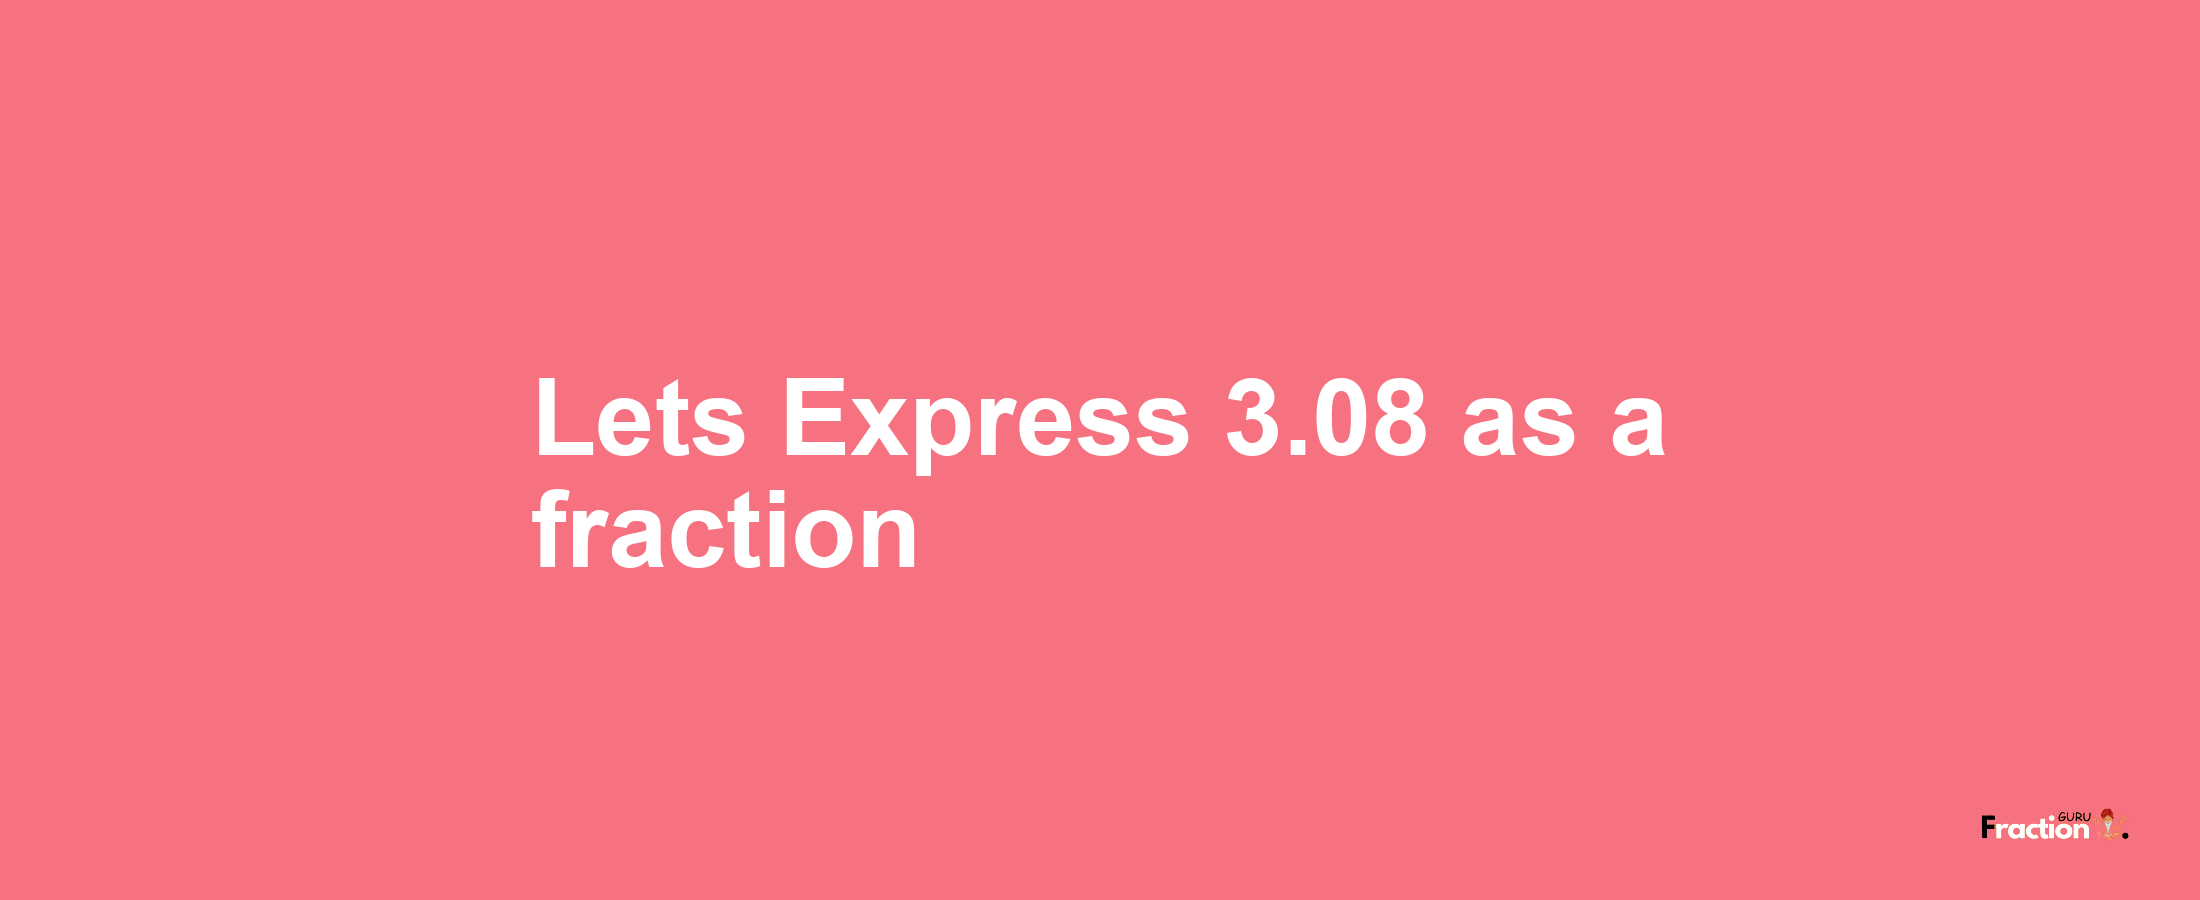 Lets Express 3.08 as afraction